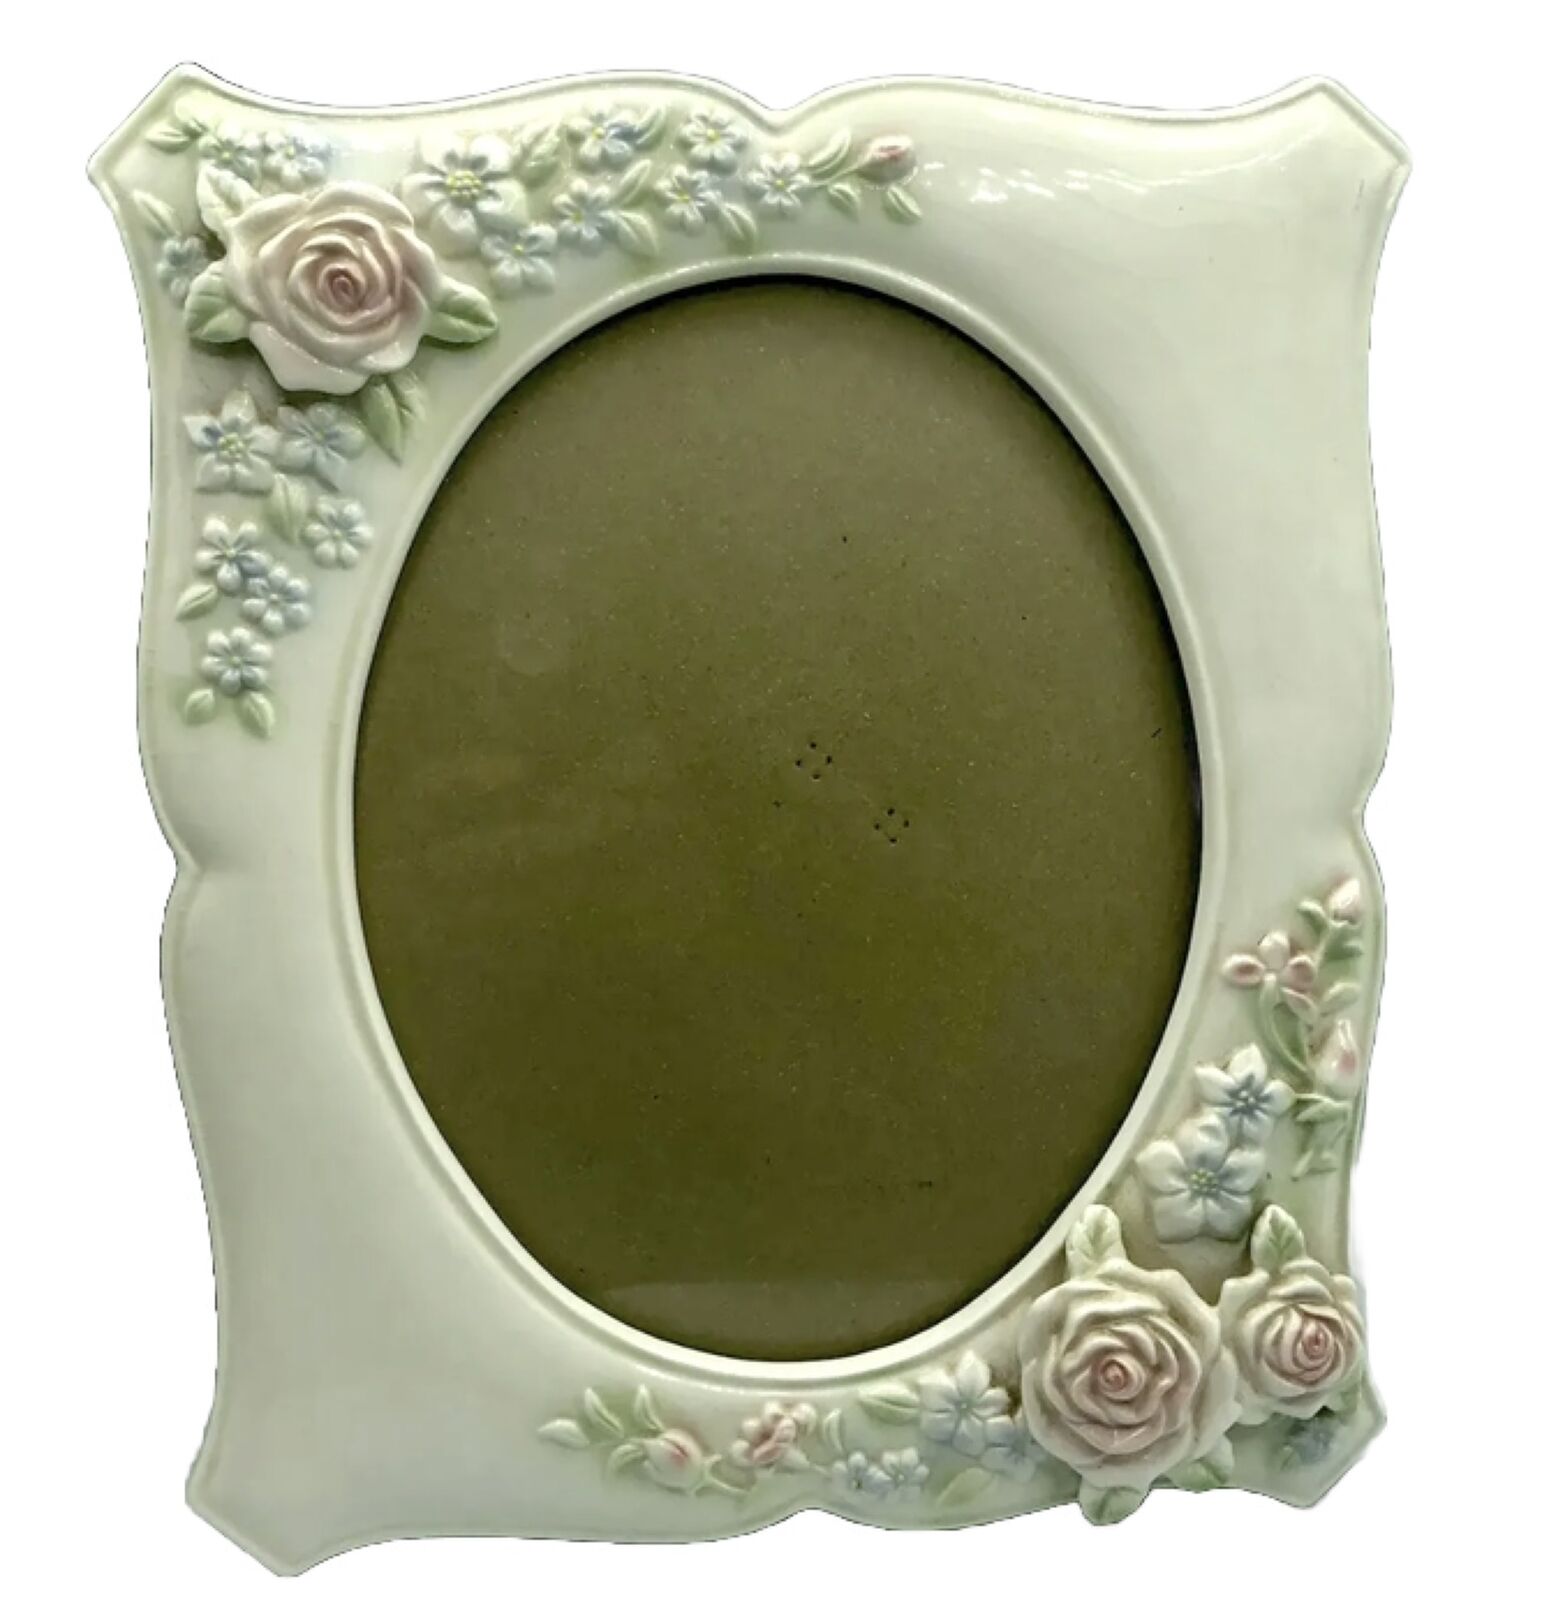 Chic Not Shabby 3D Roses Porcelain Picture Frame 11” x 13” Fun